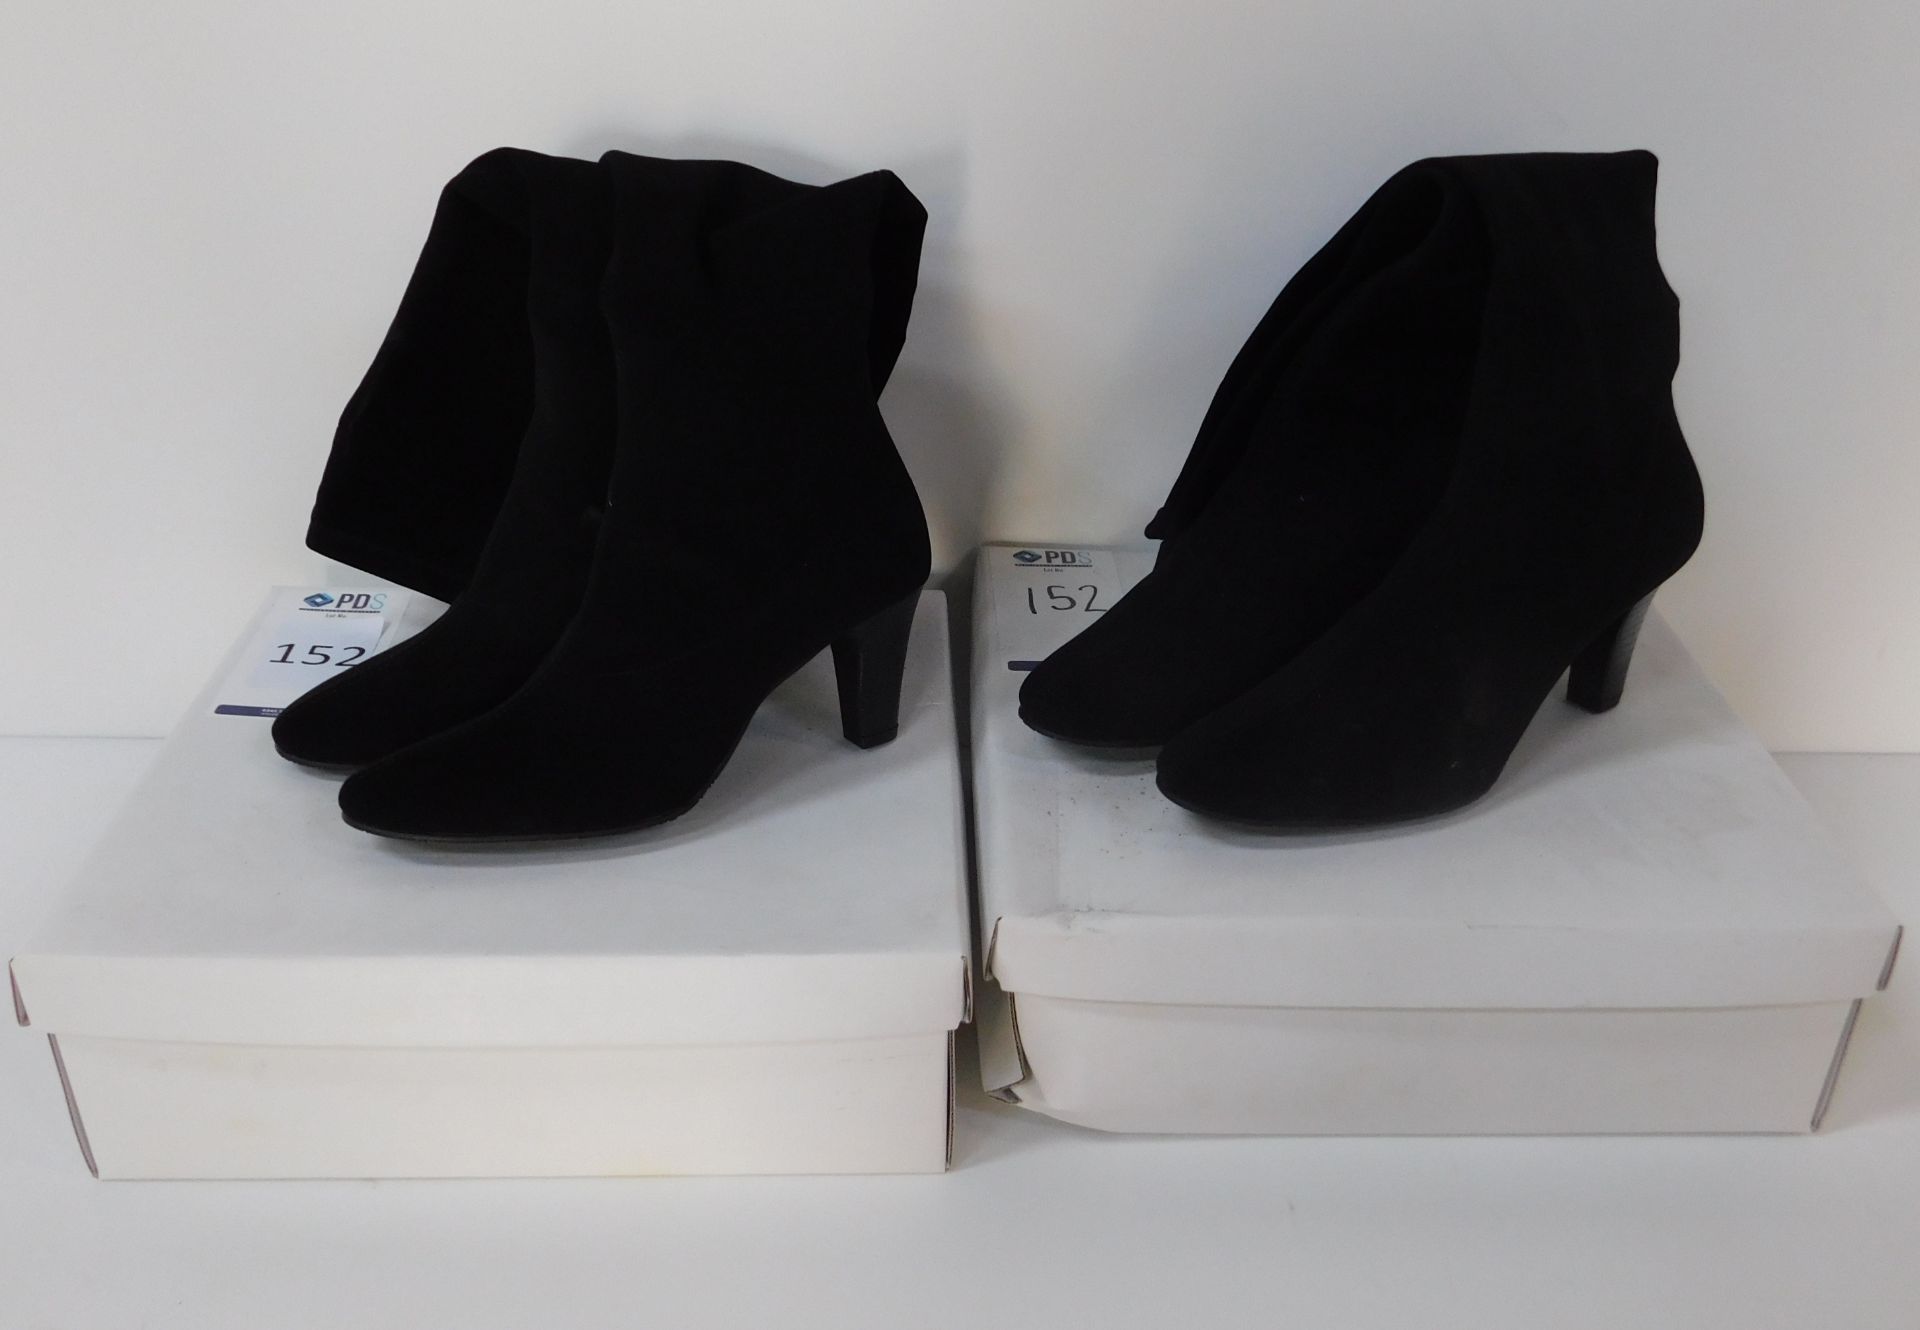 Two Pairs of Black Licra H-Valera Ladies High Heels, Sizes 36.5 & 38 (Location: Brentwood - See